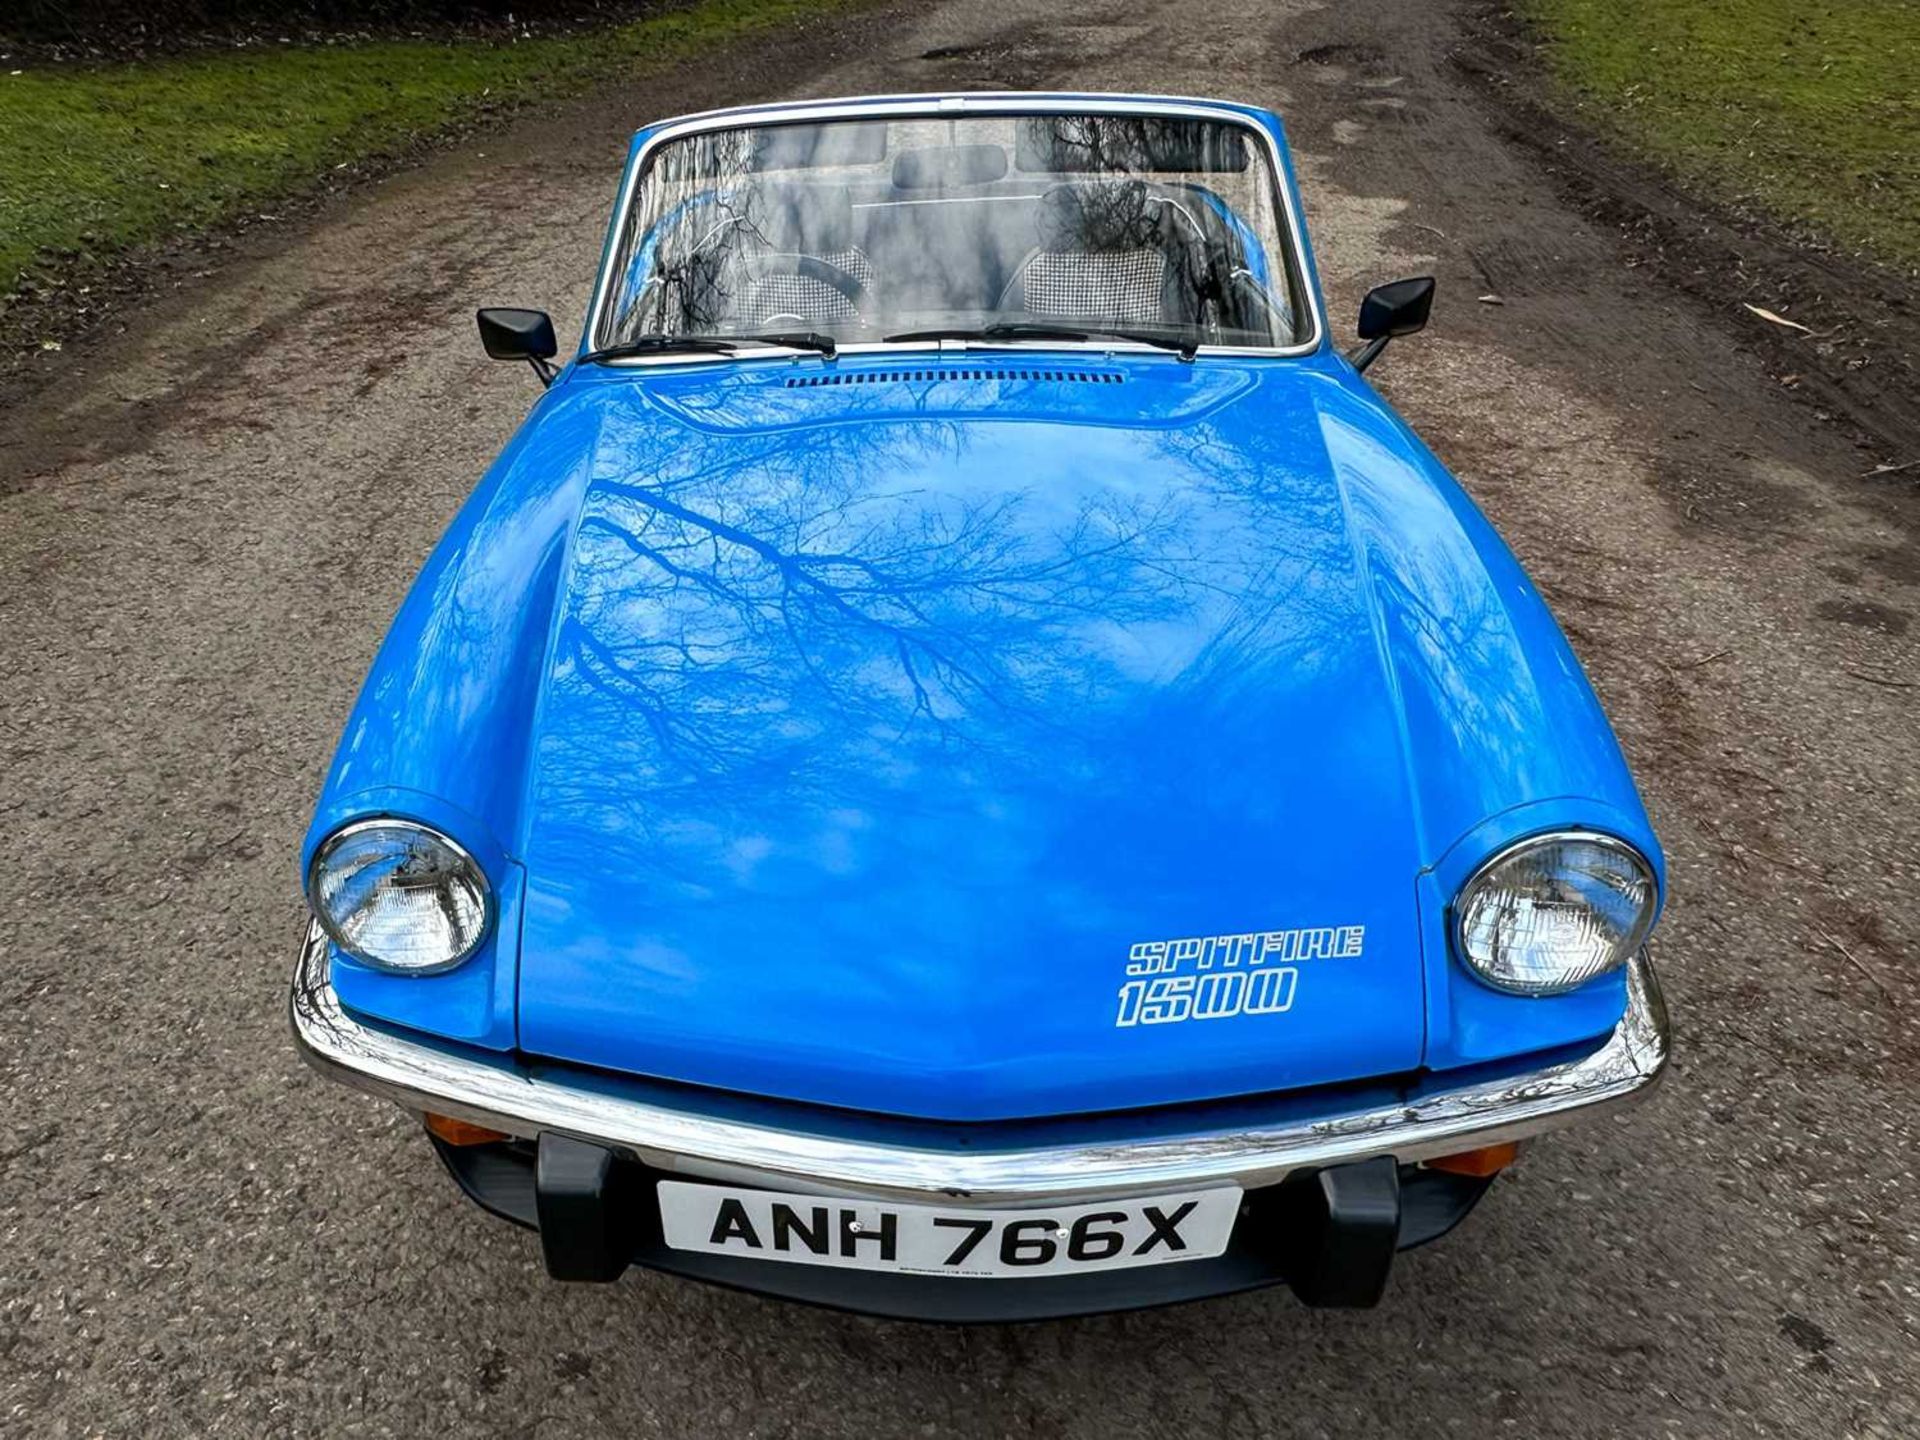 1981 Triumph Spitfire 1500 Comes with original bill of sale - Image 13 of 96